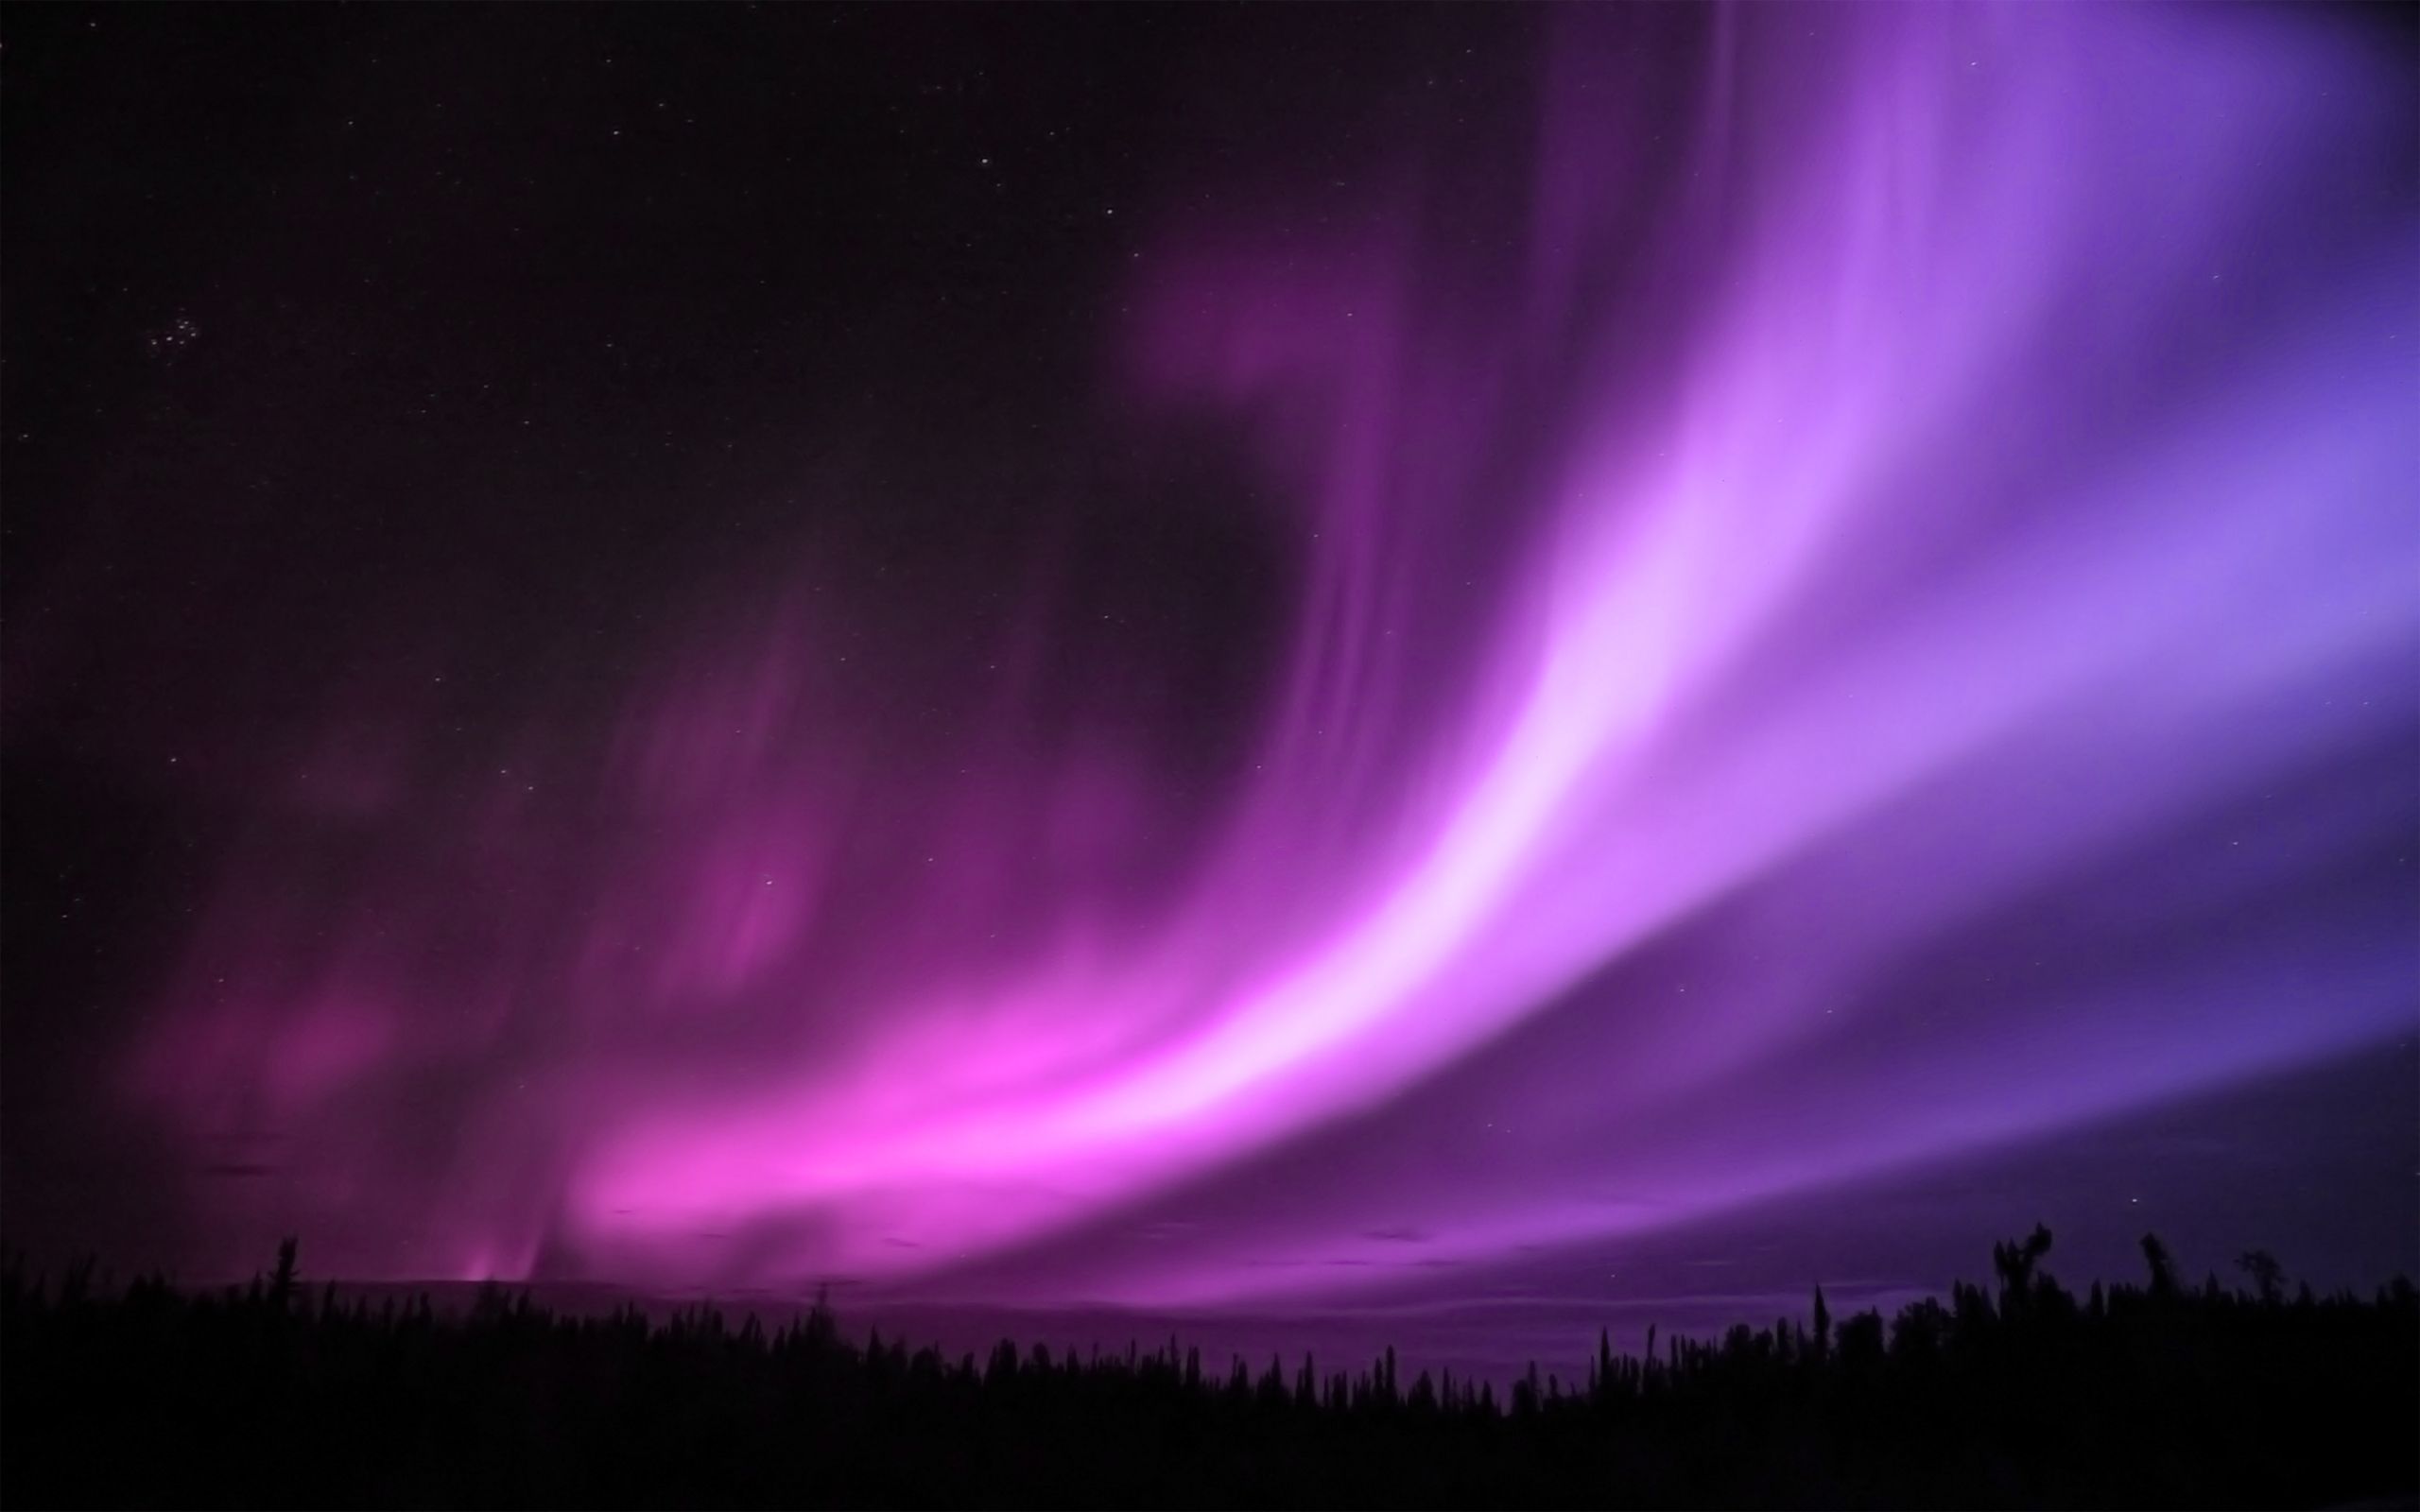 The Aurora Borealis, also known as the Northern Lights, is a natural light display in the Earth's atmosphere. - Night